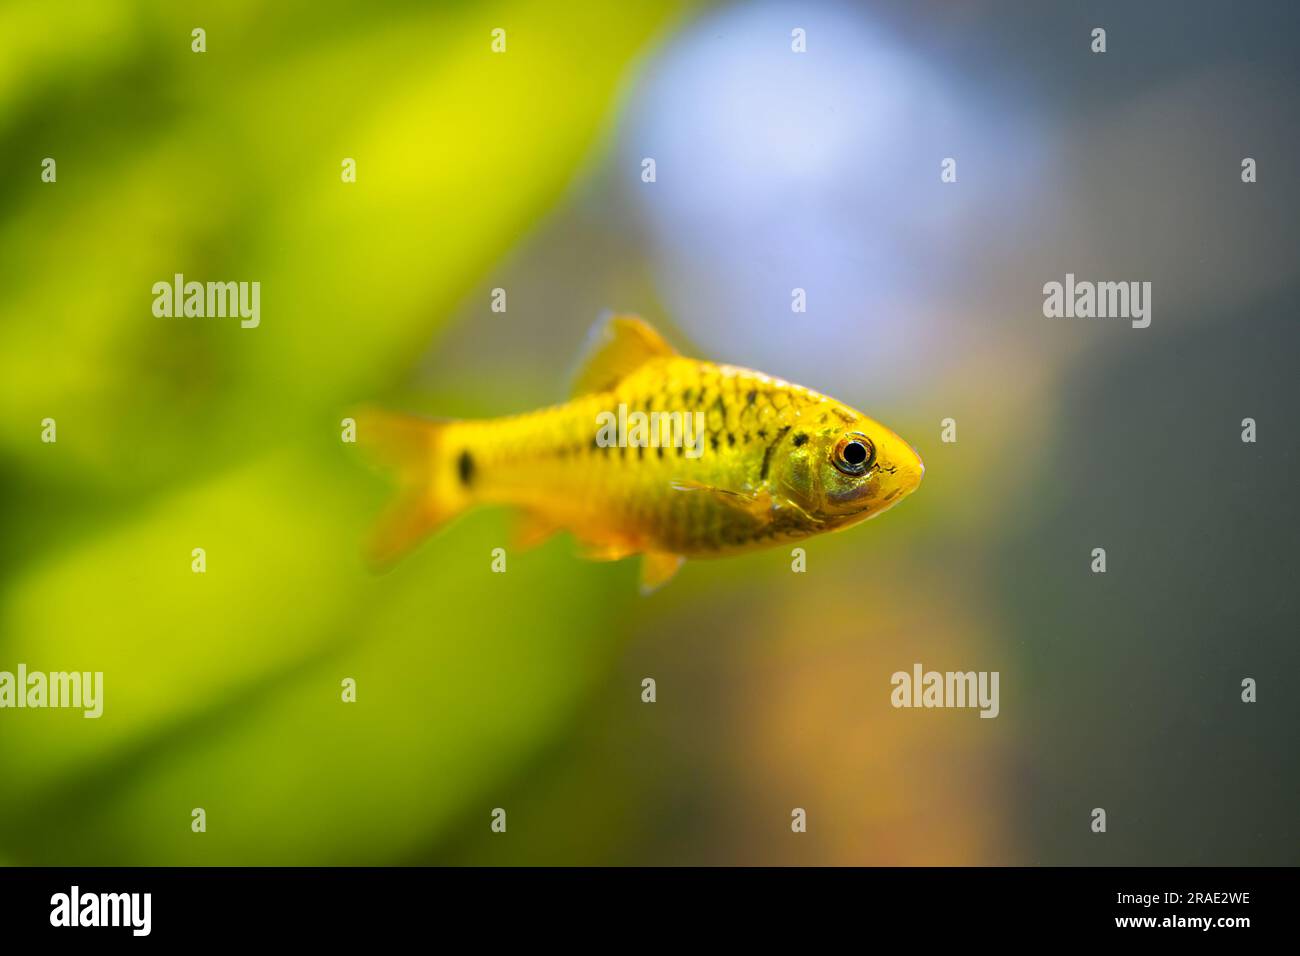 selective focus of a chinese barb (Puntius semifasciolatus) swimming in a fish tank with blurred background Stock Photo